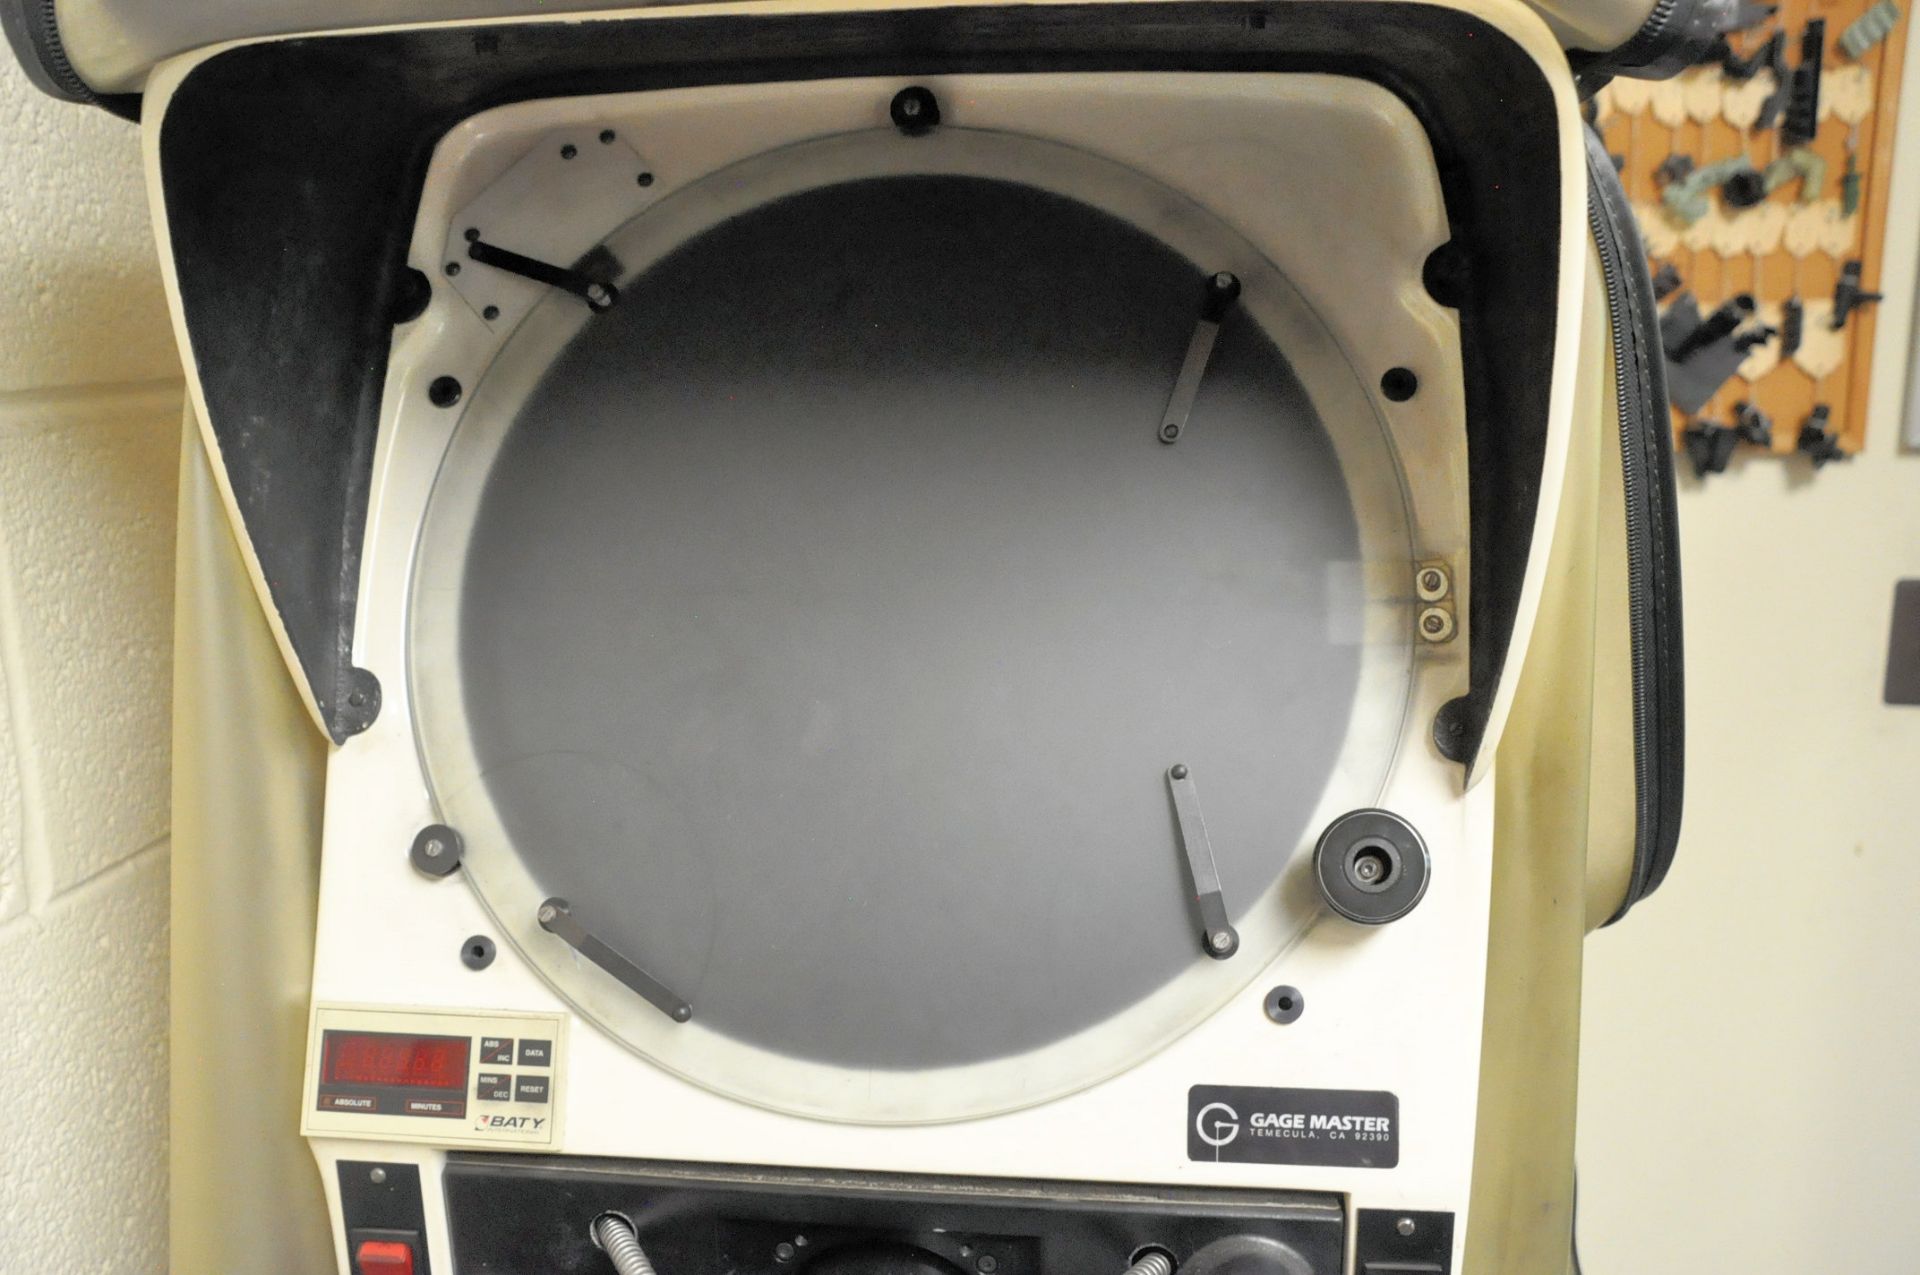 Gage Master 14" Optical Comparator, S/n 2452, with Cabinet Base - Image 3 of 5